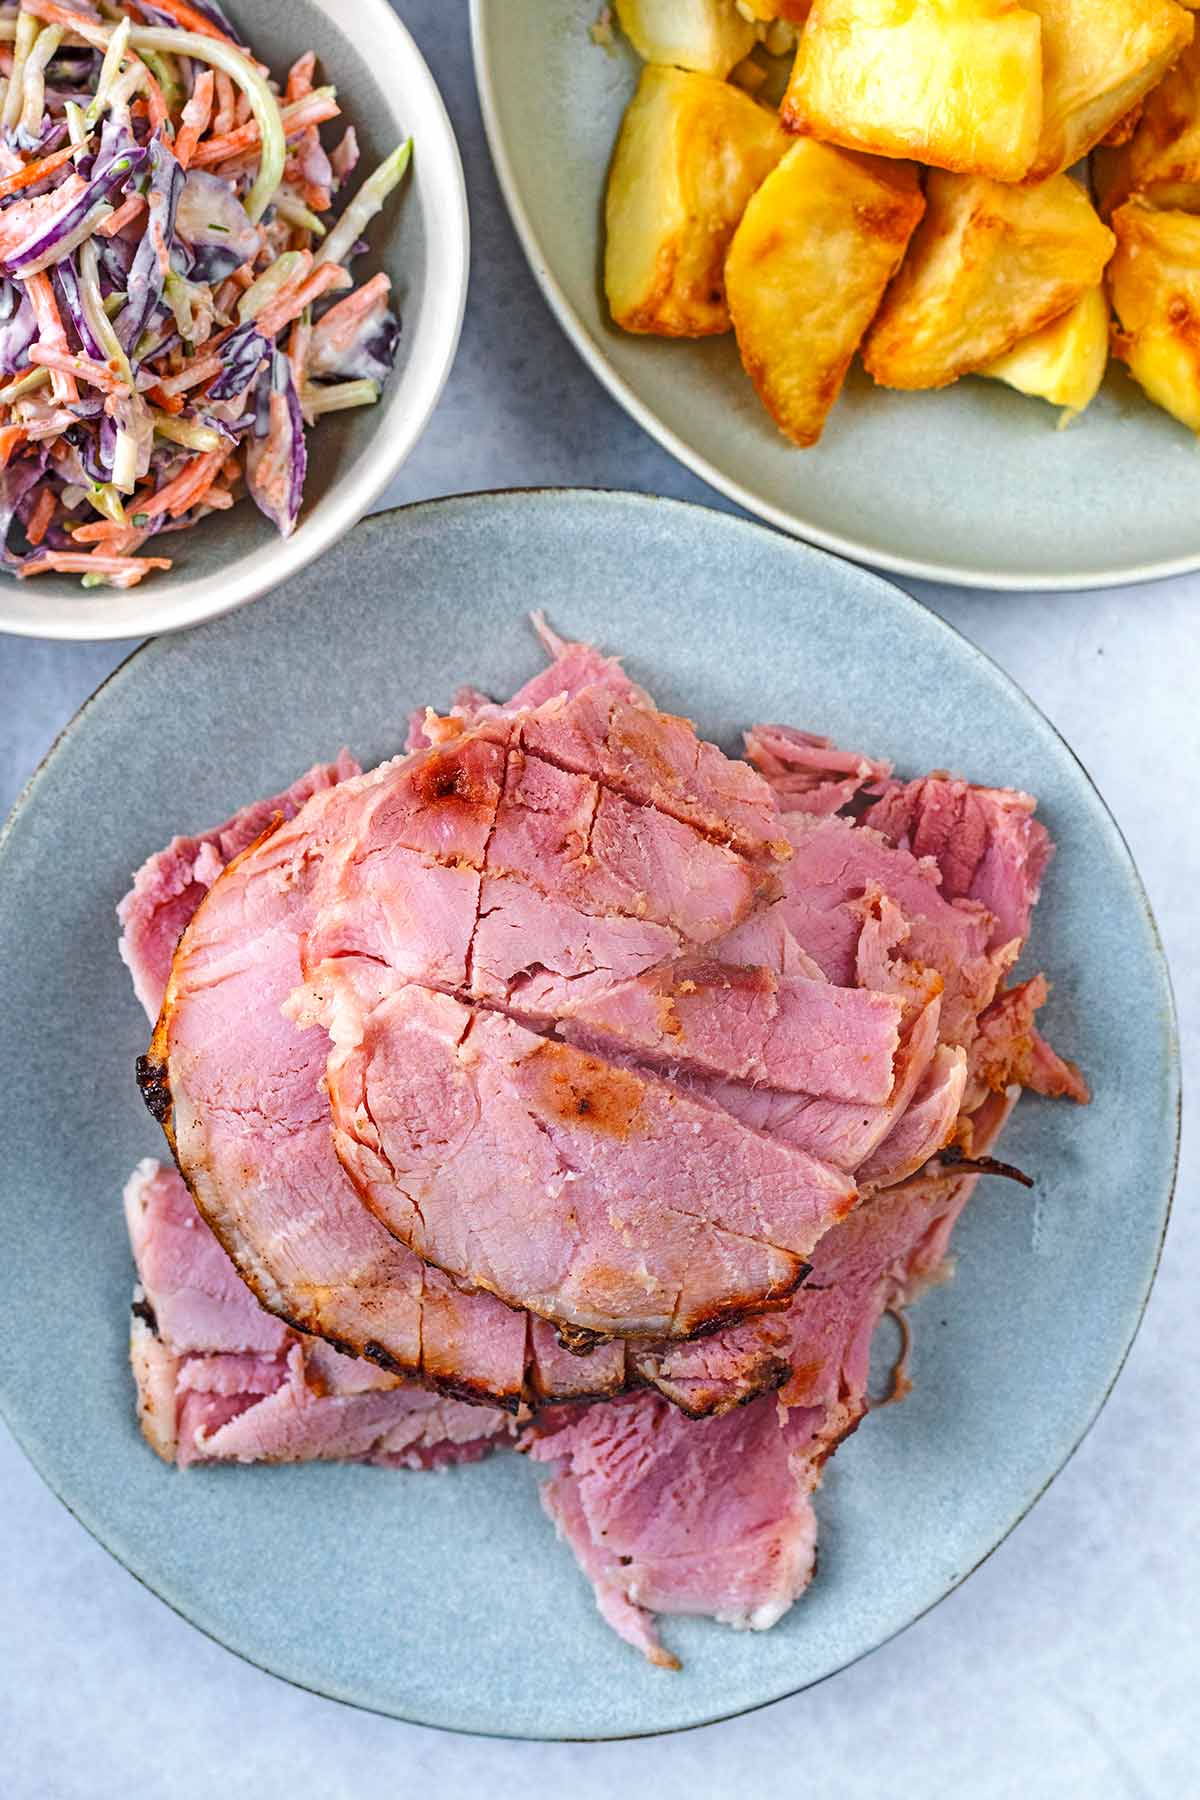 A plate of sliced ham next to bowls of roast potatoes and slaw.